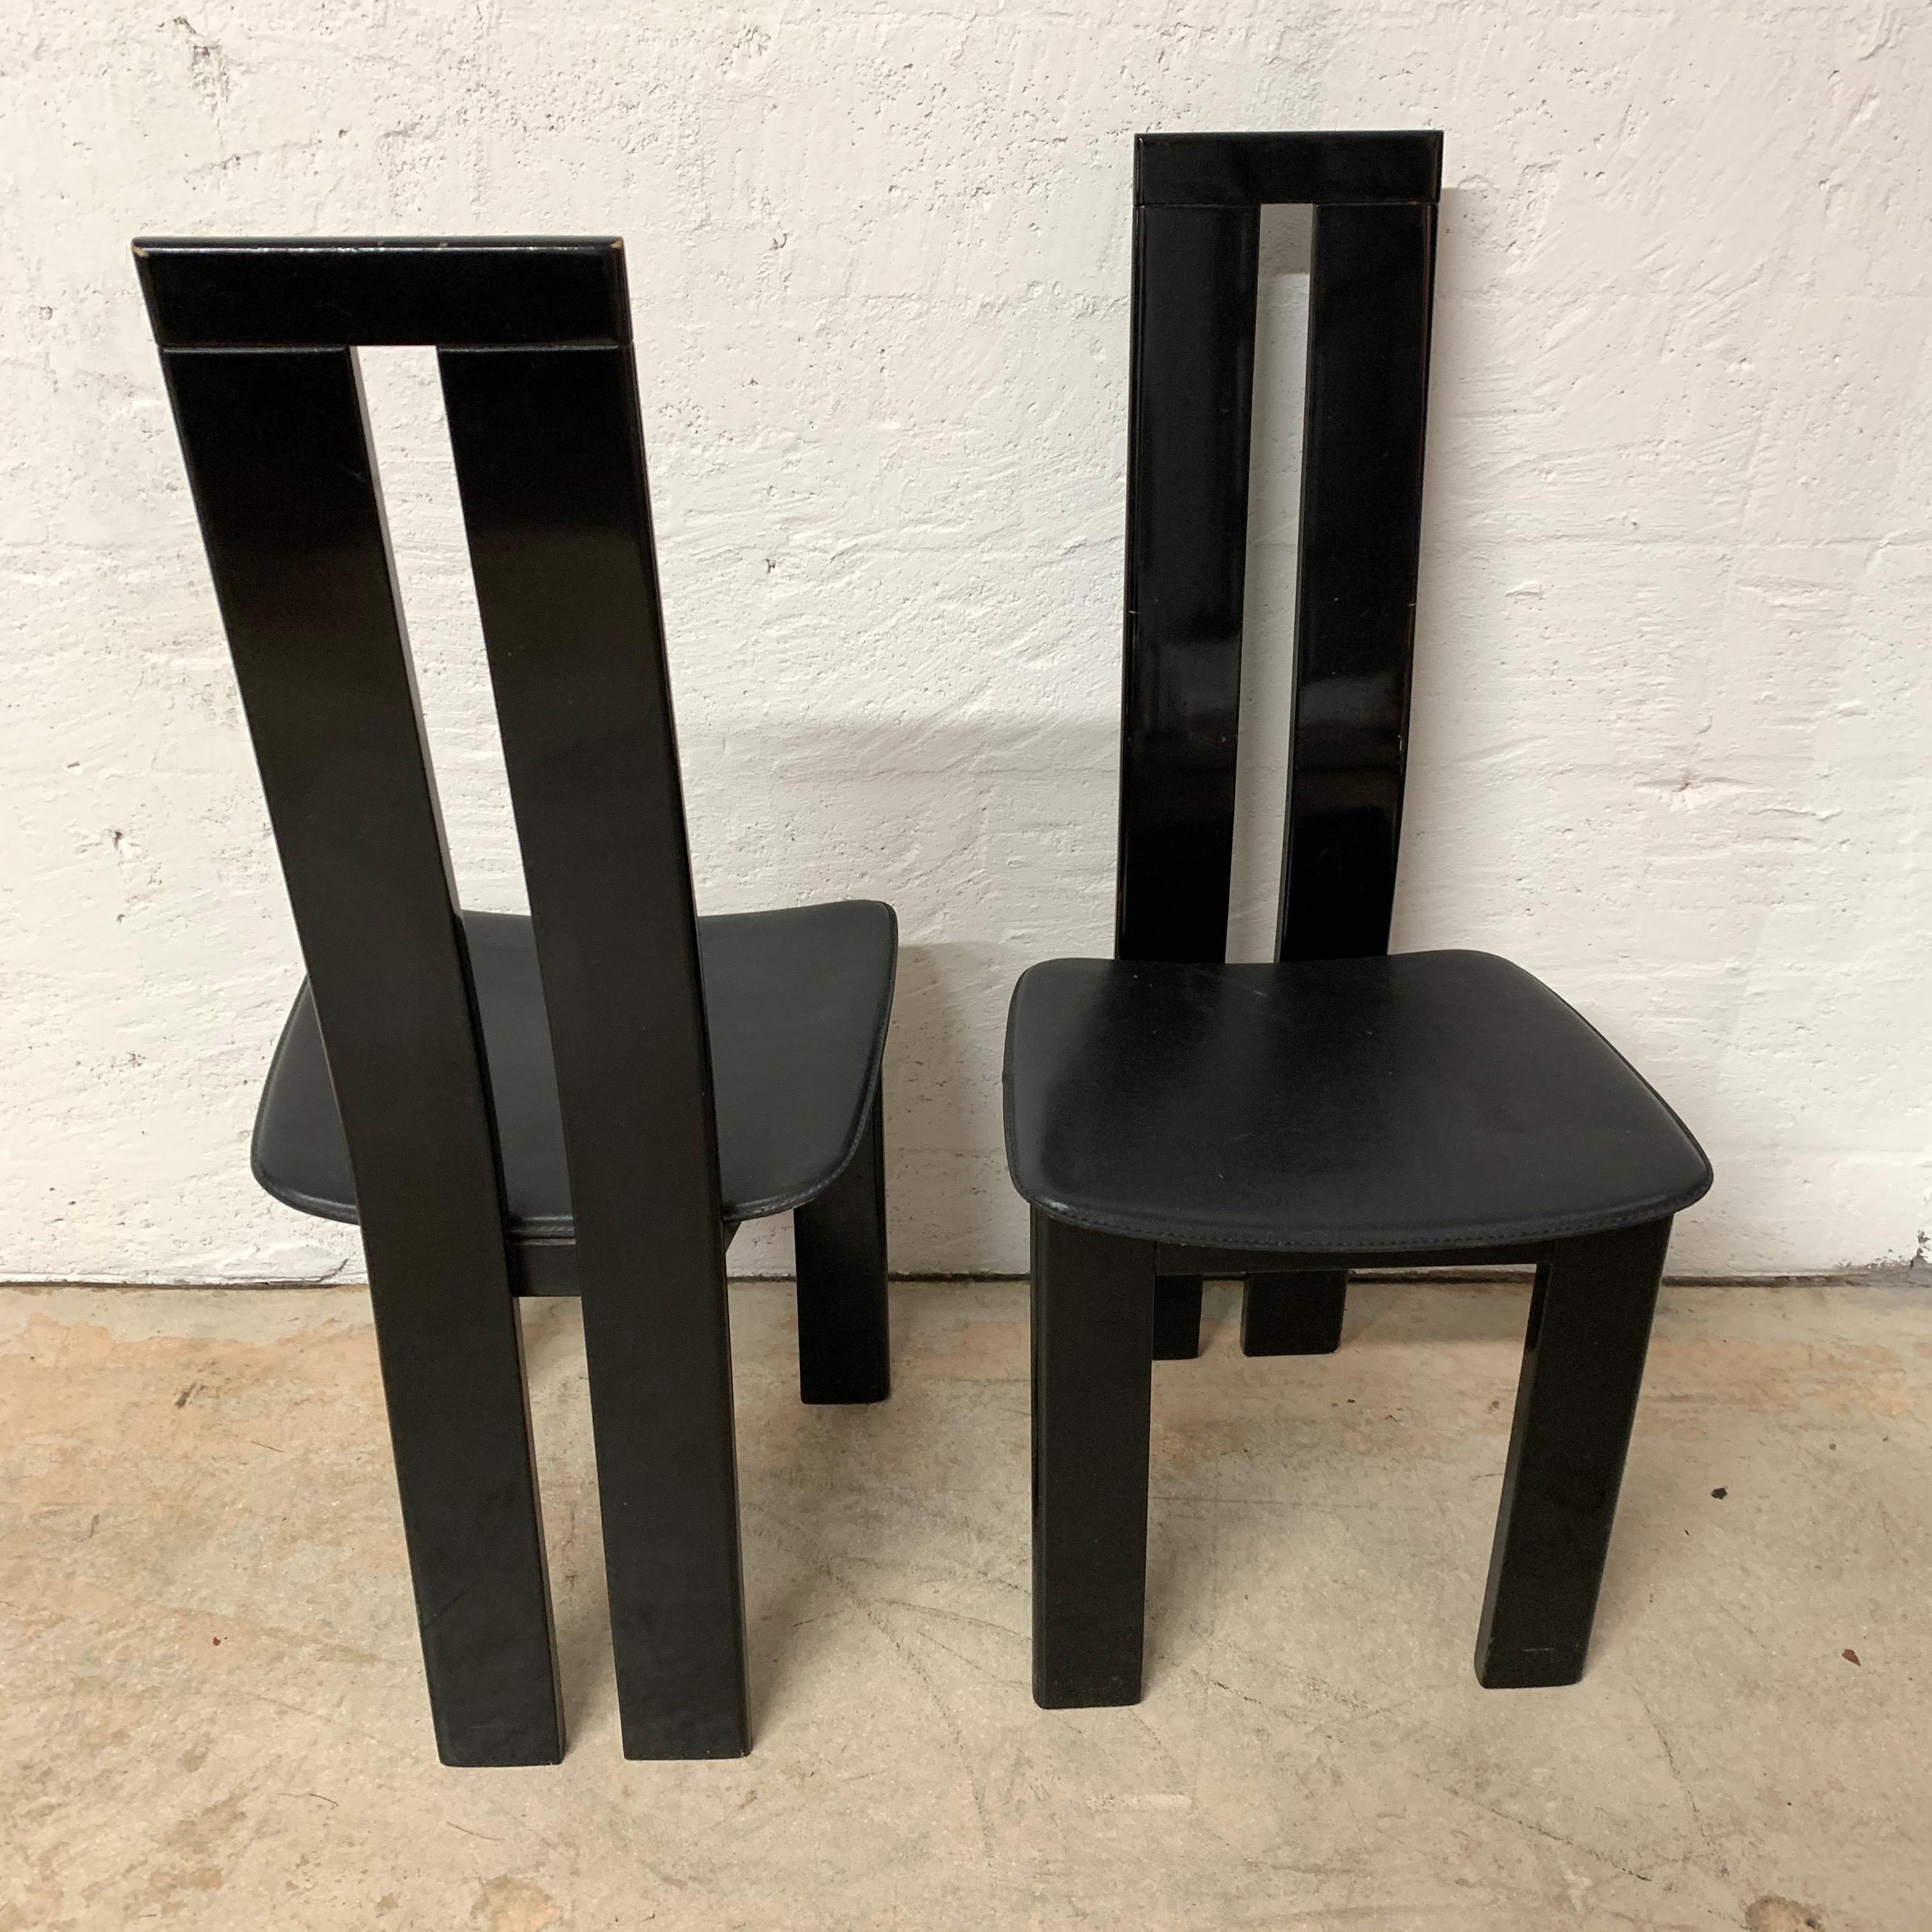 Set of two Postmodern chairs rendered in black lacquered wood frame with black stitched saddle leather seats, attributed to Massimo Vignelli.